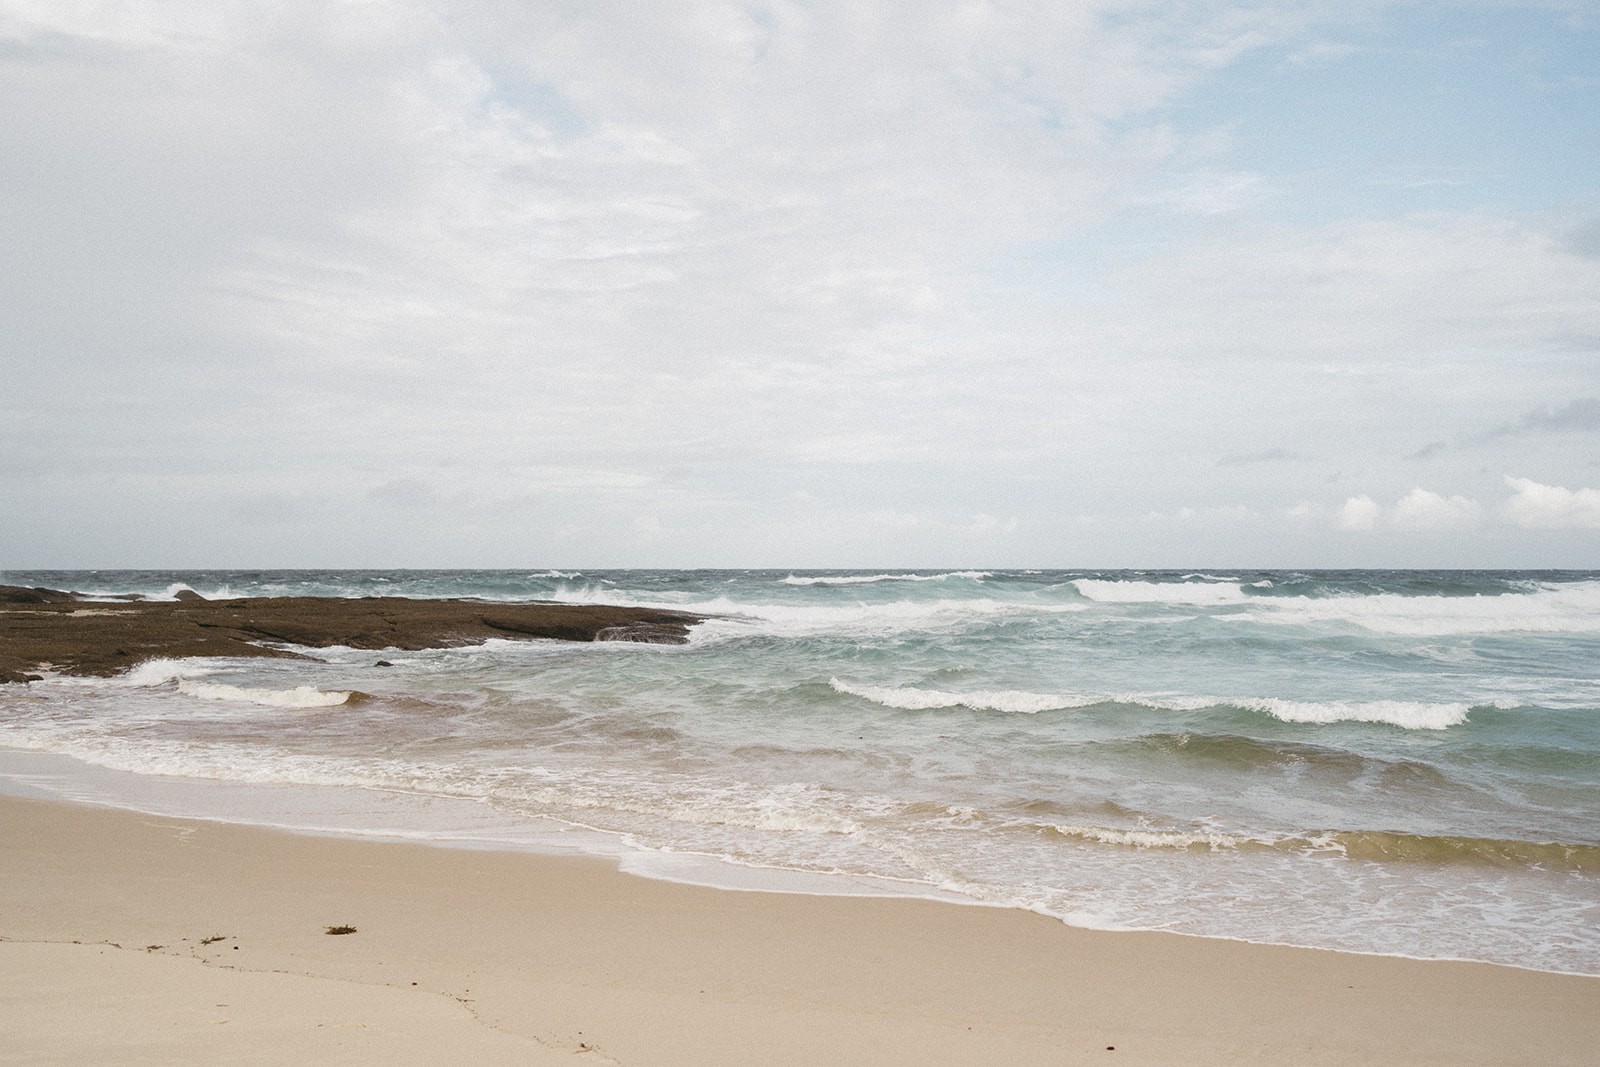 Tropical beach elopement destination wedding photographer Claire Coulthard based in UK